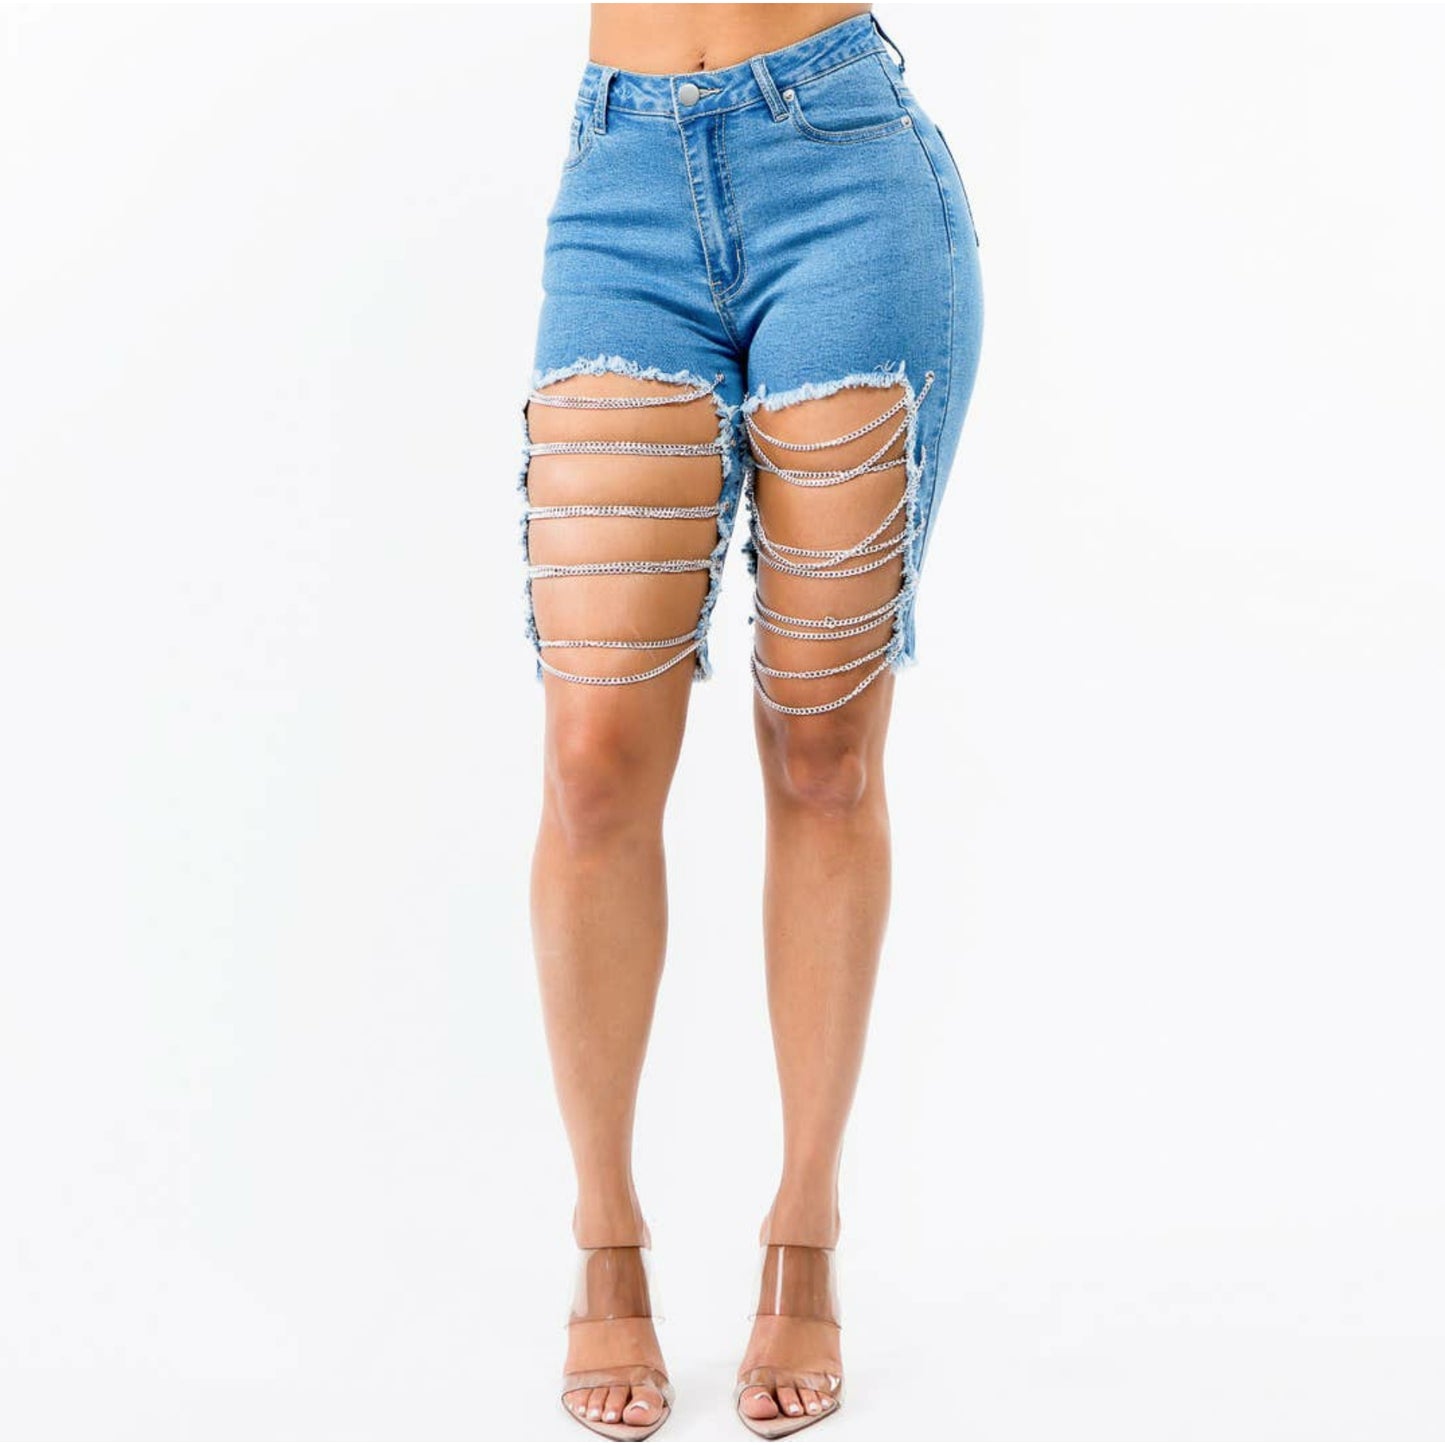 Chained Up Shorts (Small - 3X)